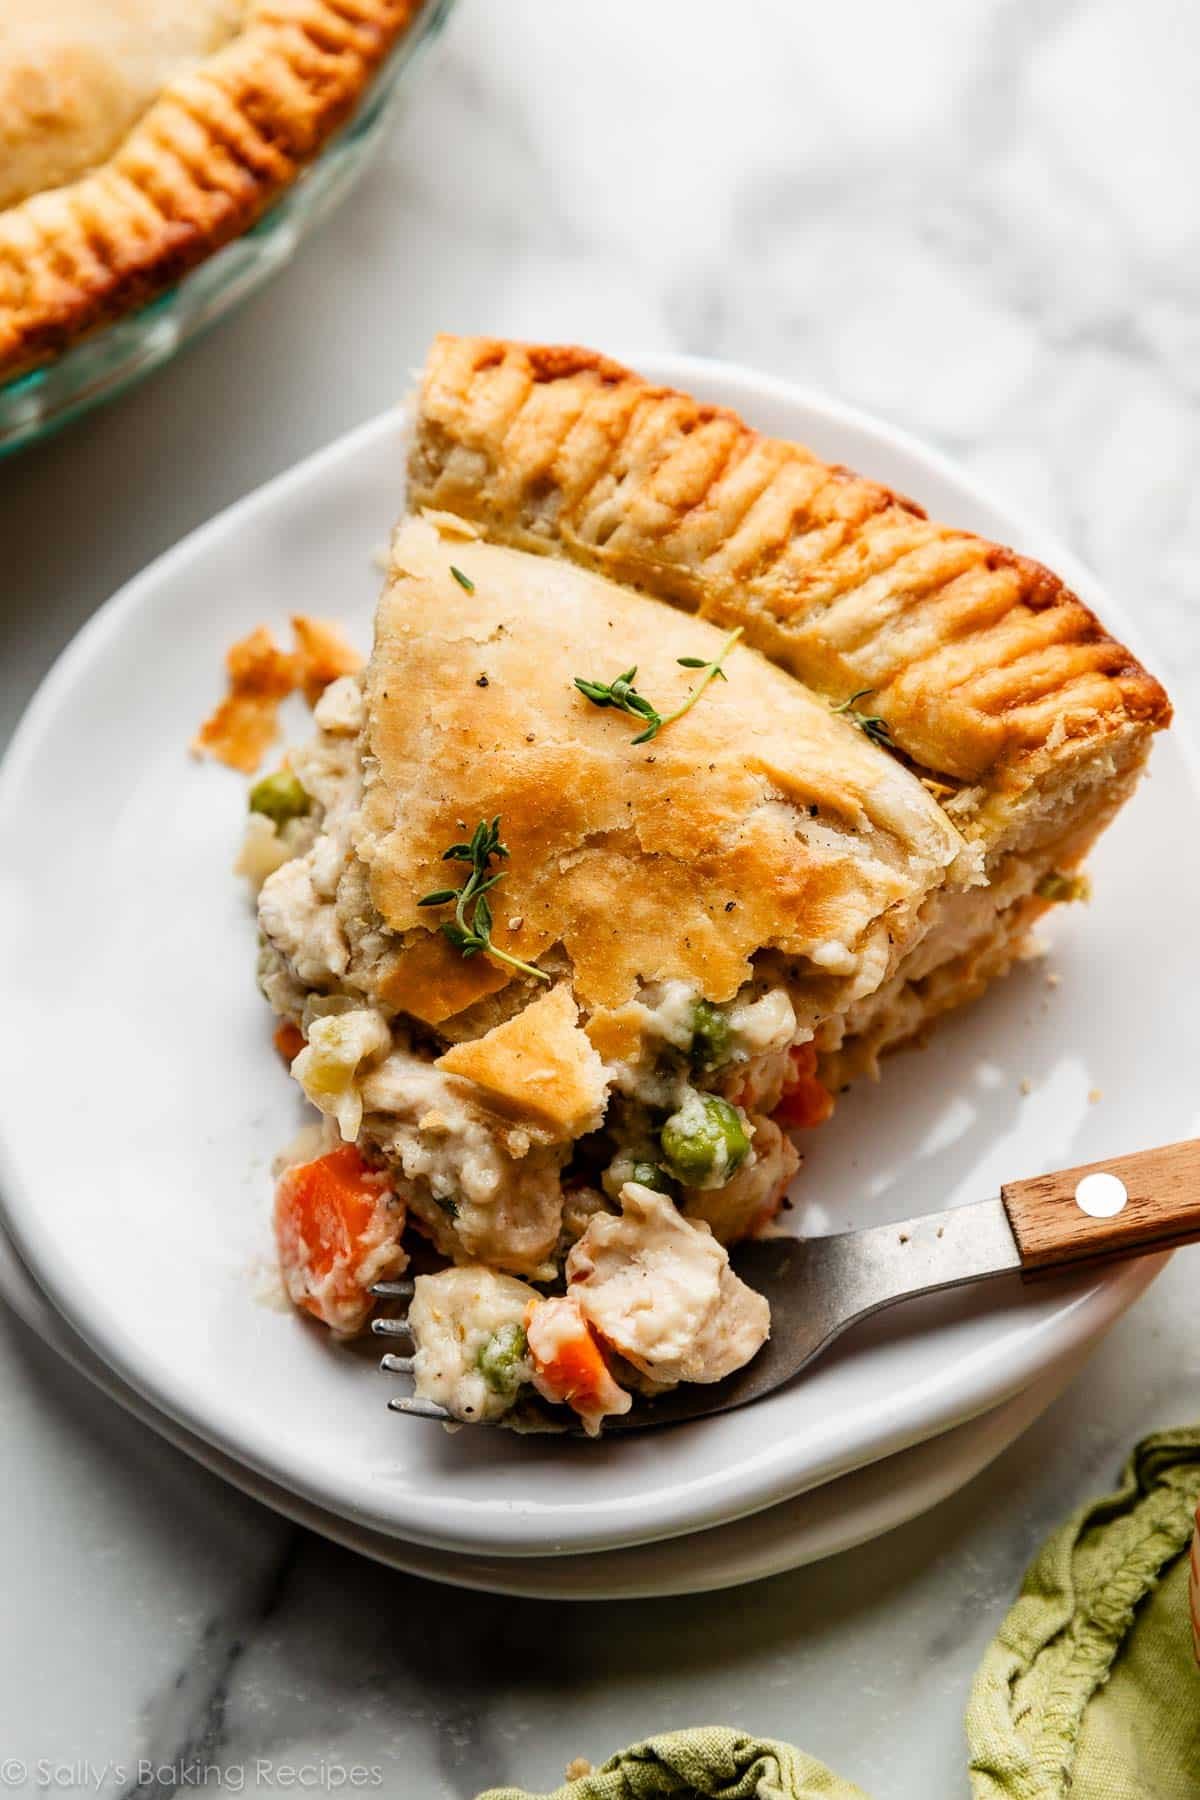 slice of double crust chicken pot pie with golden flaky pie crust on white plate with fork that has a wooden handle.